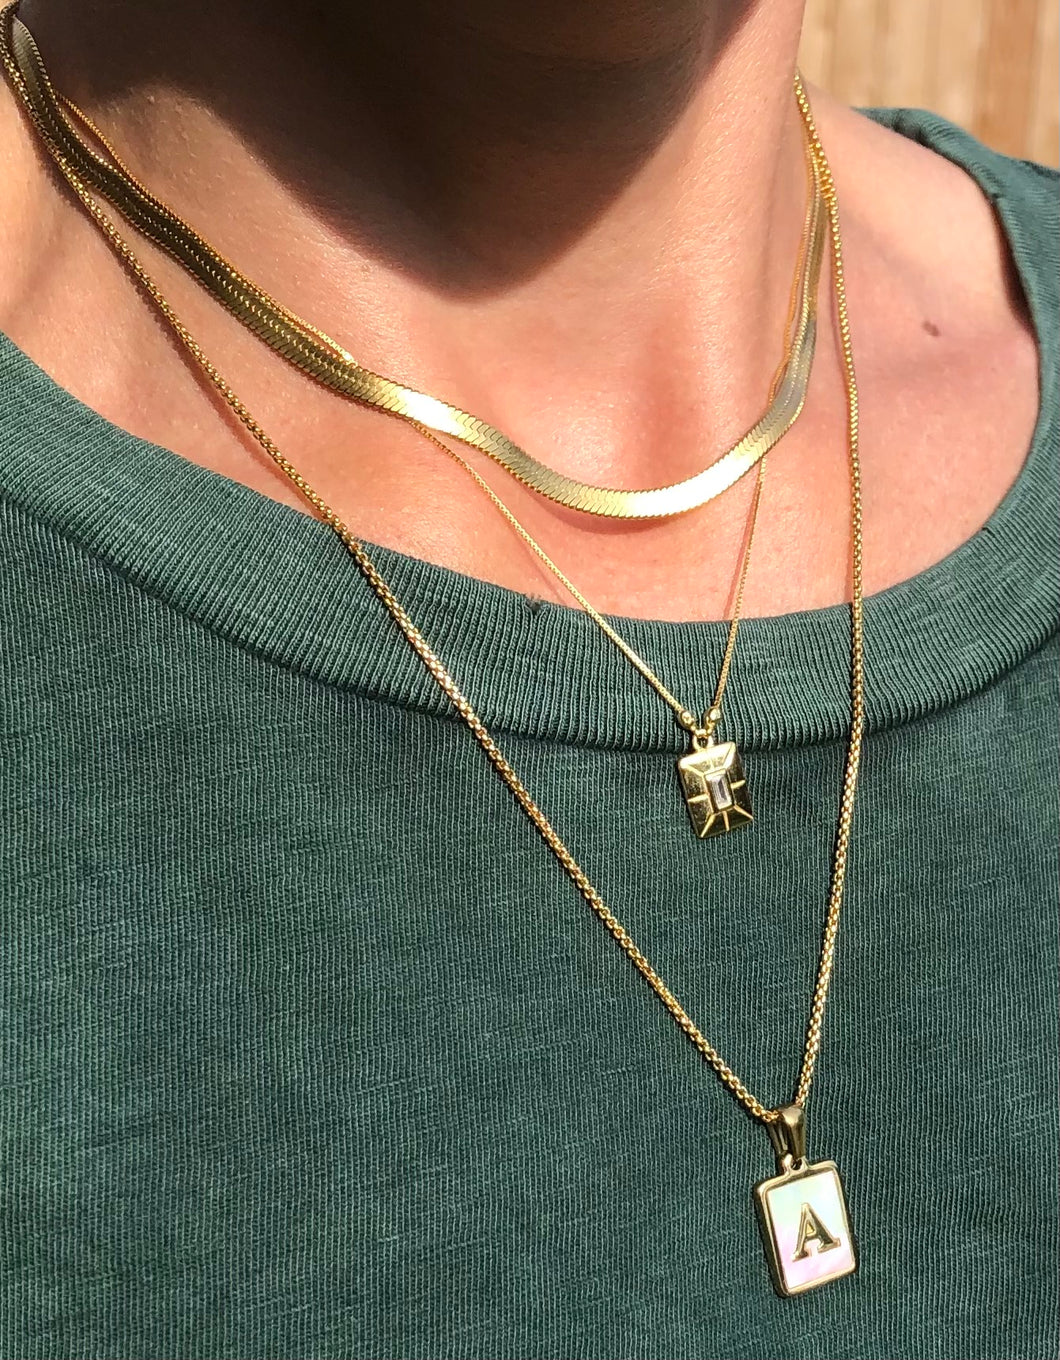 Be on trend by adding our herringbone necklace to any of your favorite necklace stack! It adds a bold statement but still looks classic. It will give the dullest outfit the perfect amount of style and class.   18k gold or 925 sterling silver plated stainless steel  14in or 16in chain with 2in extender 